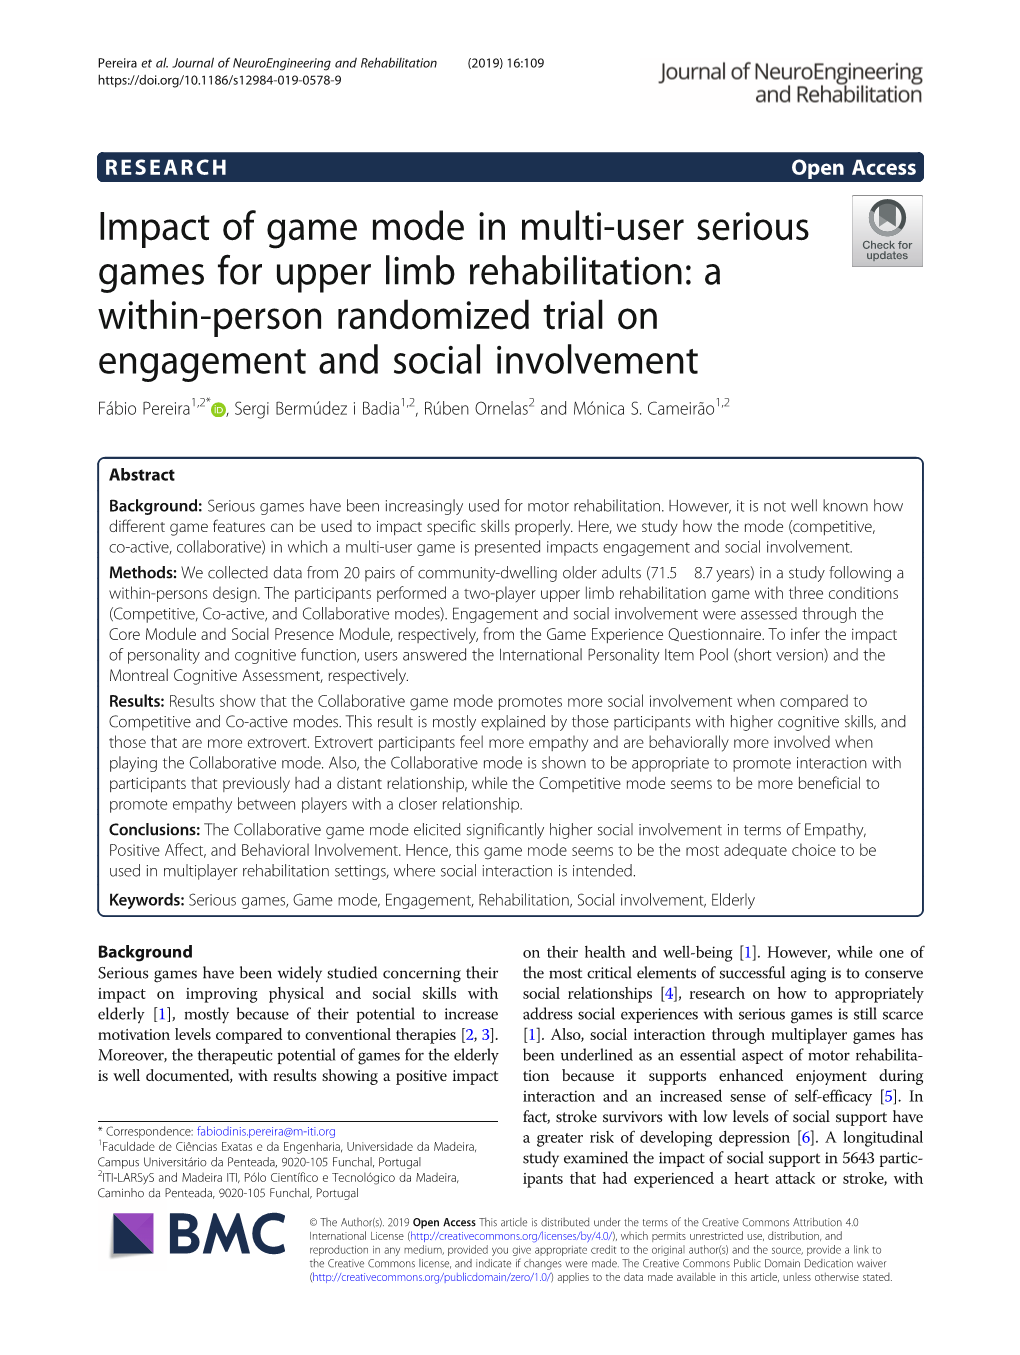 Impact of Game Mode in Multi-User Serious Games for Upper Limb Rehabilitation